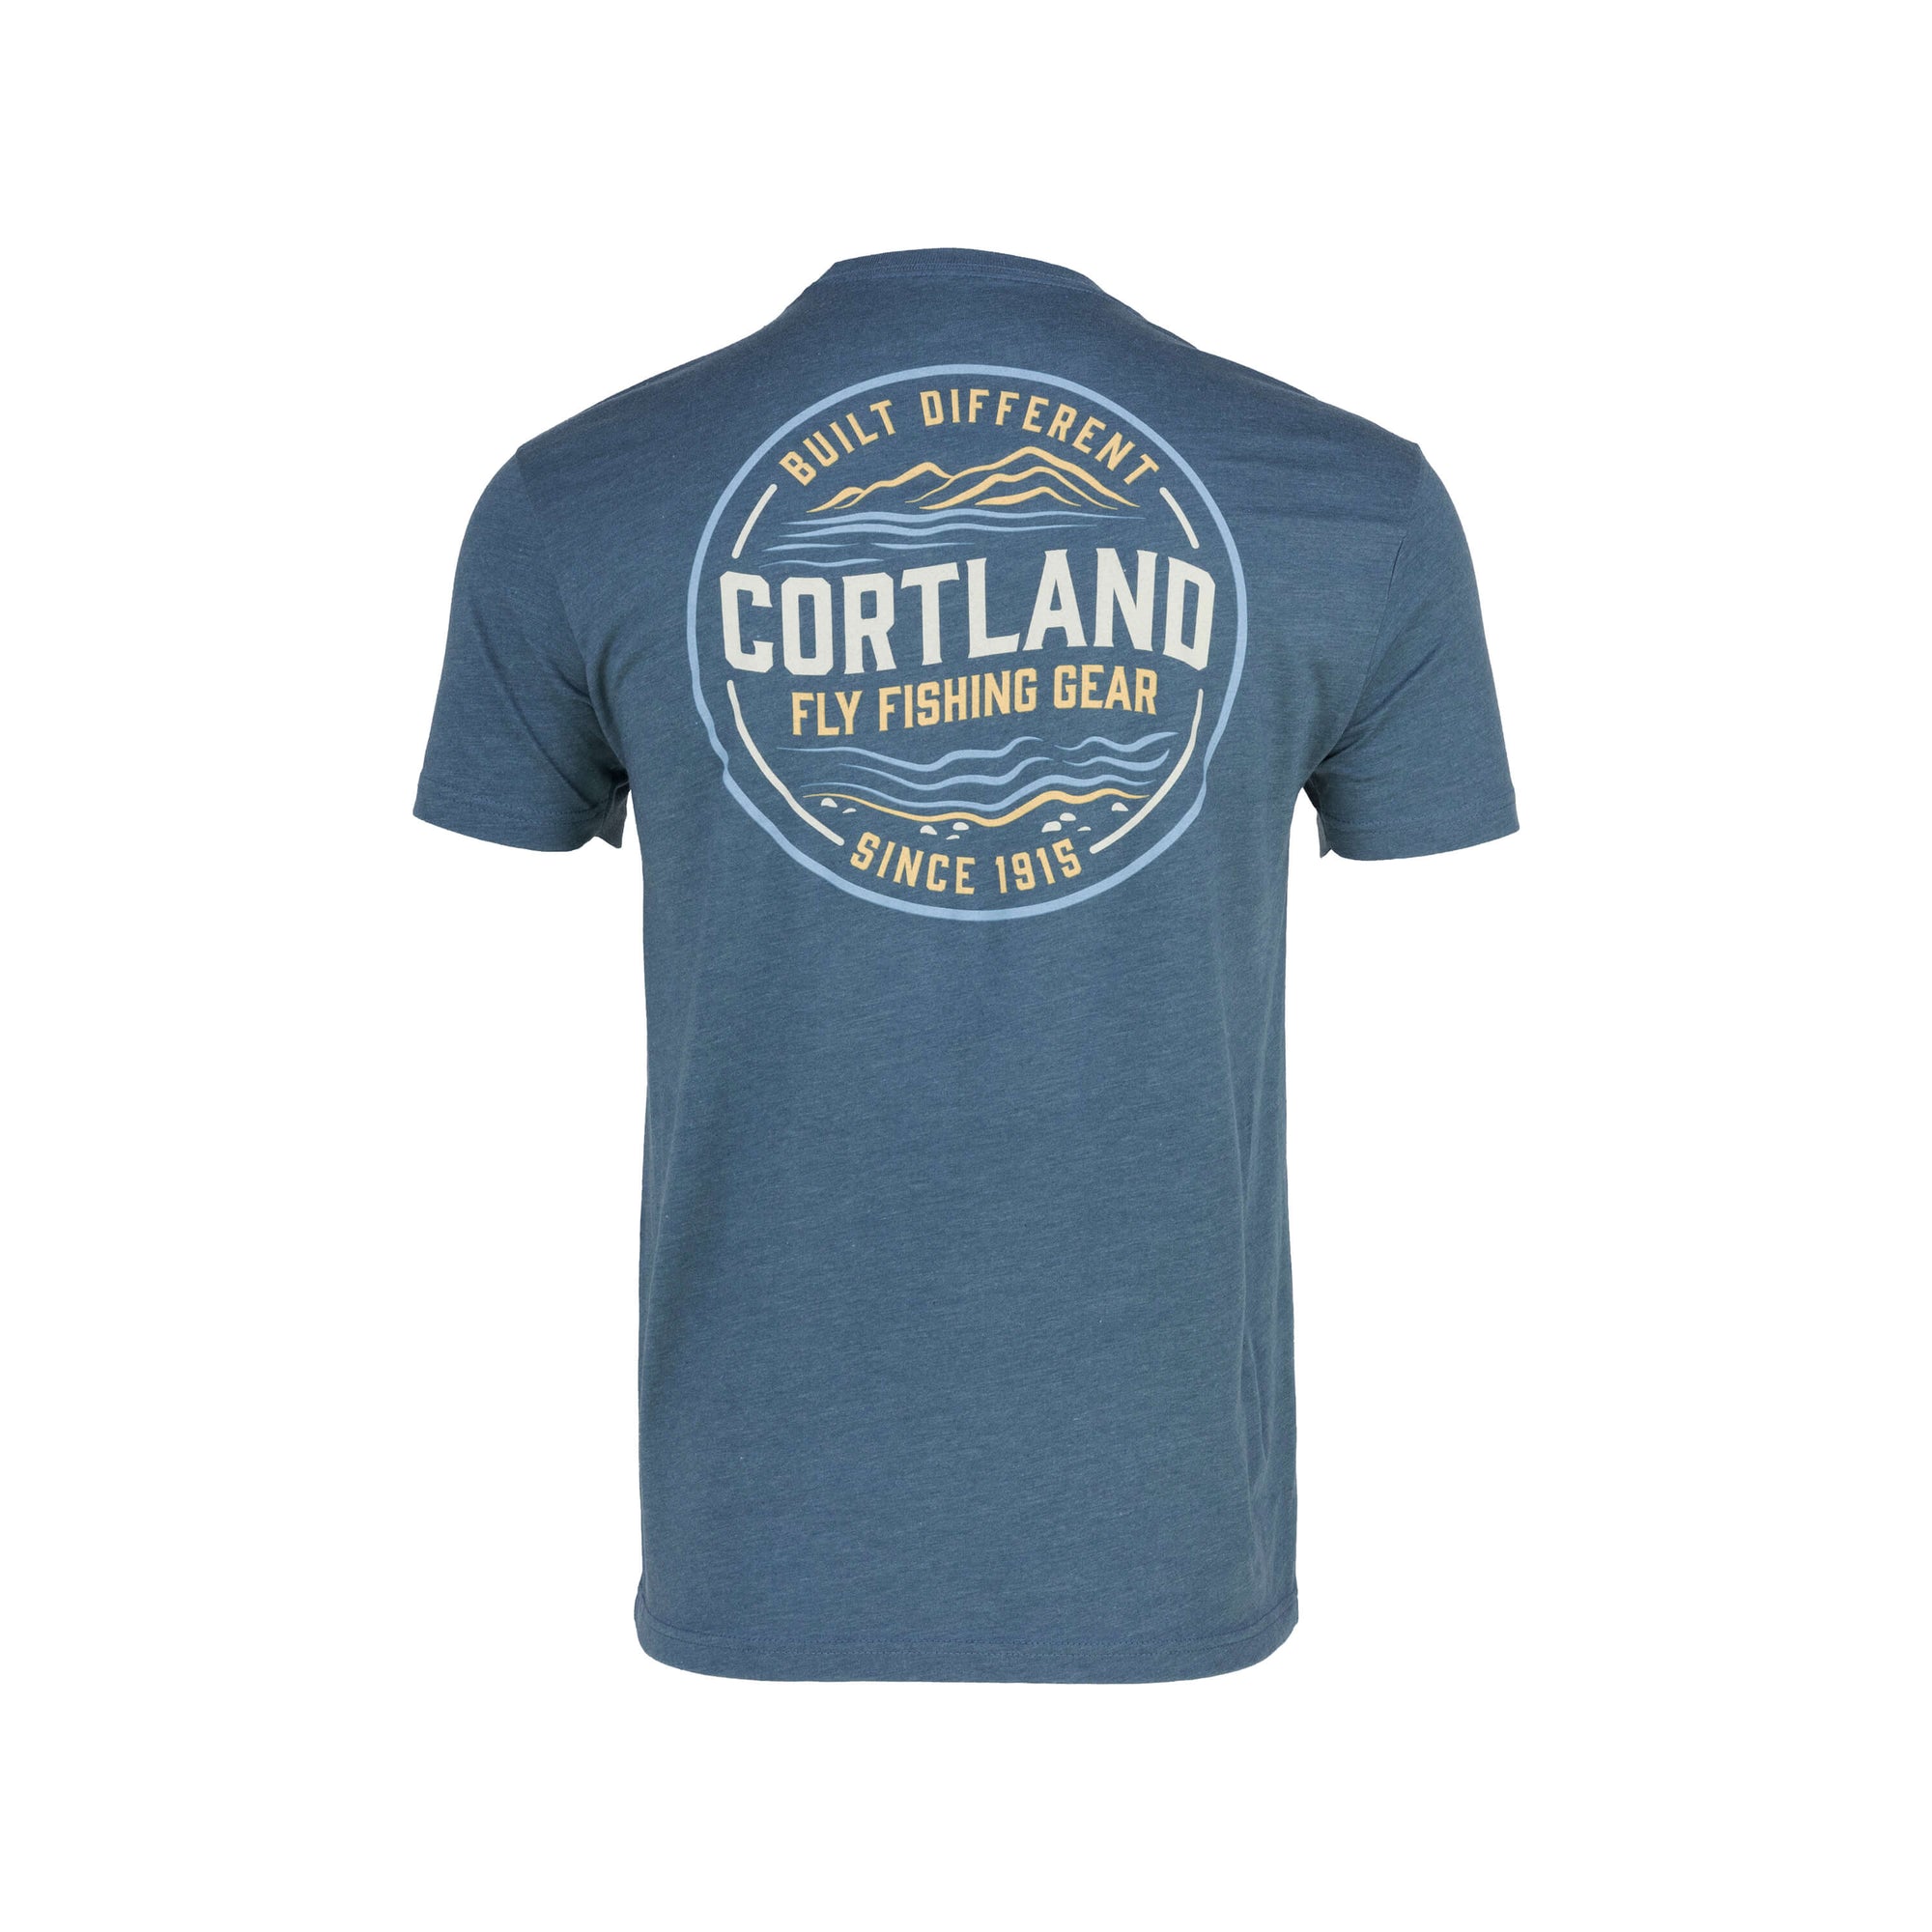 Back view of Cortland Built Different T-Shirt 